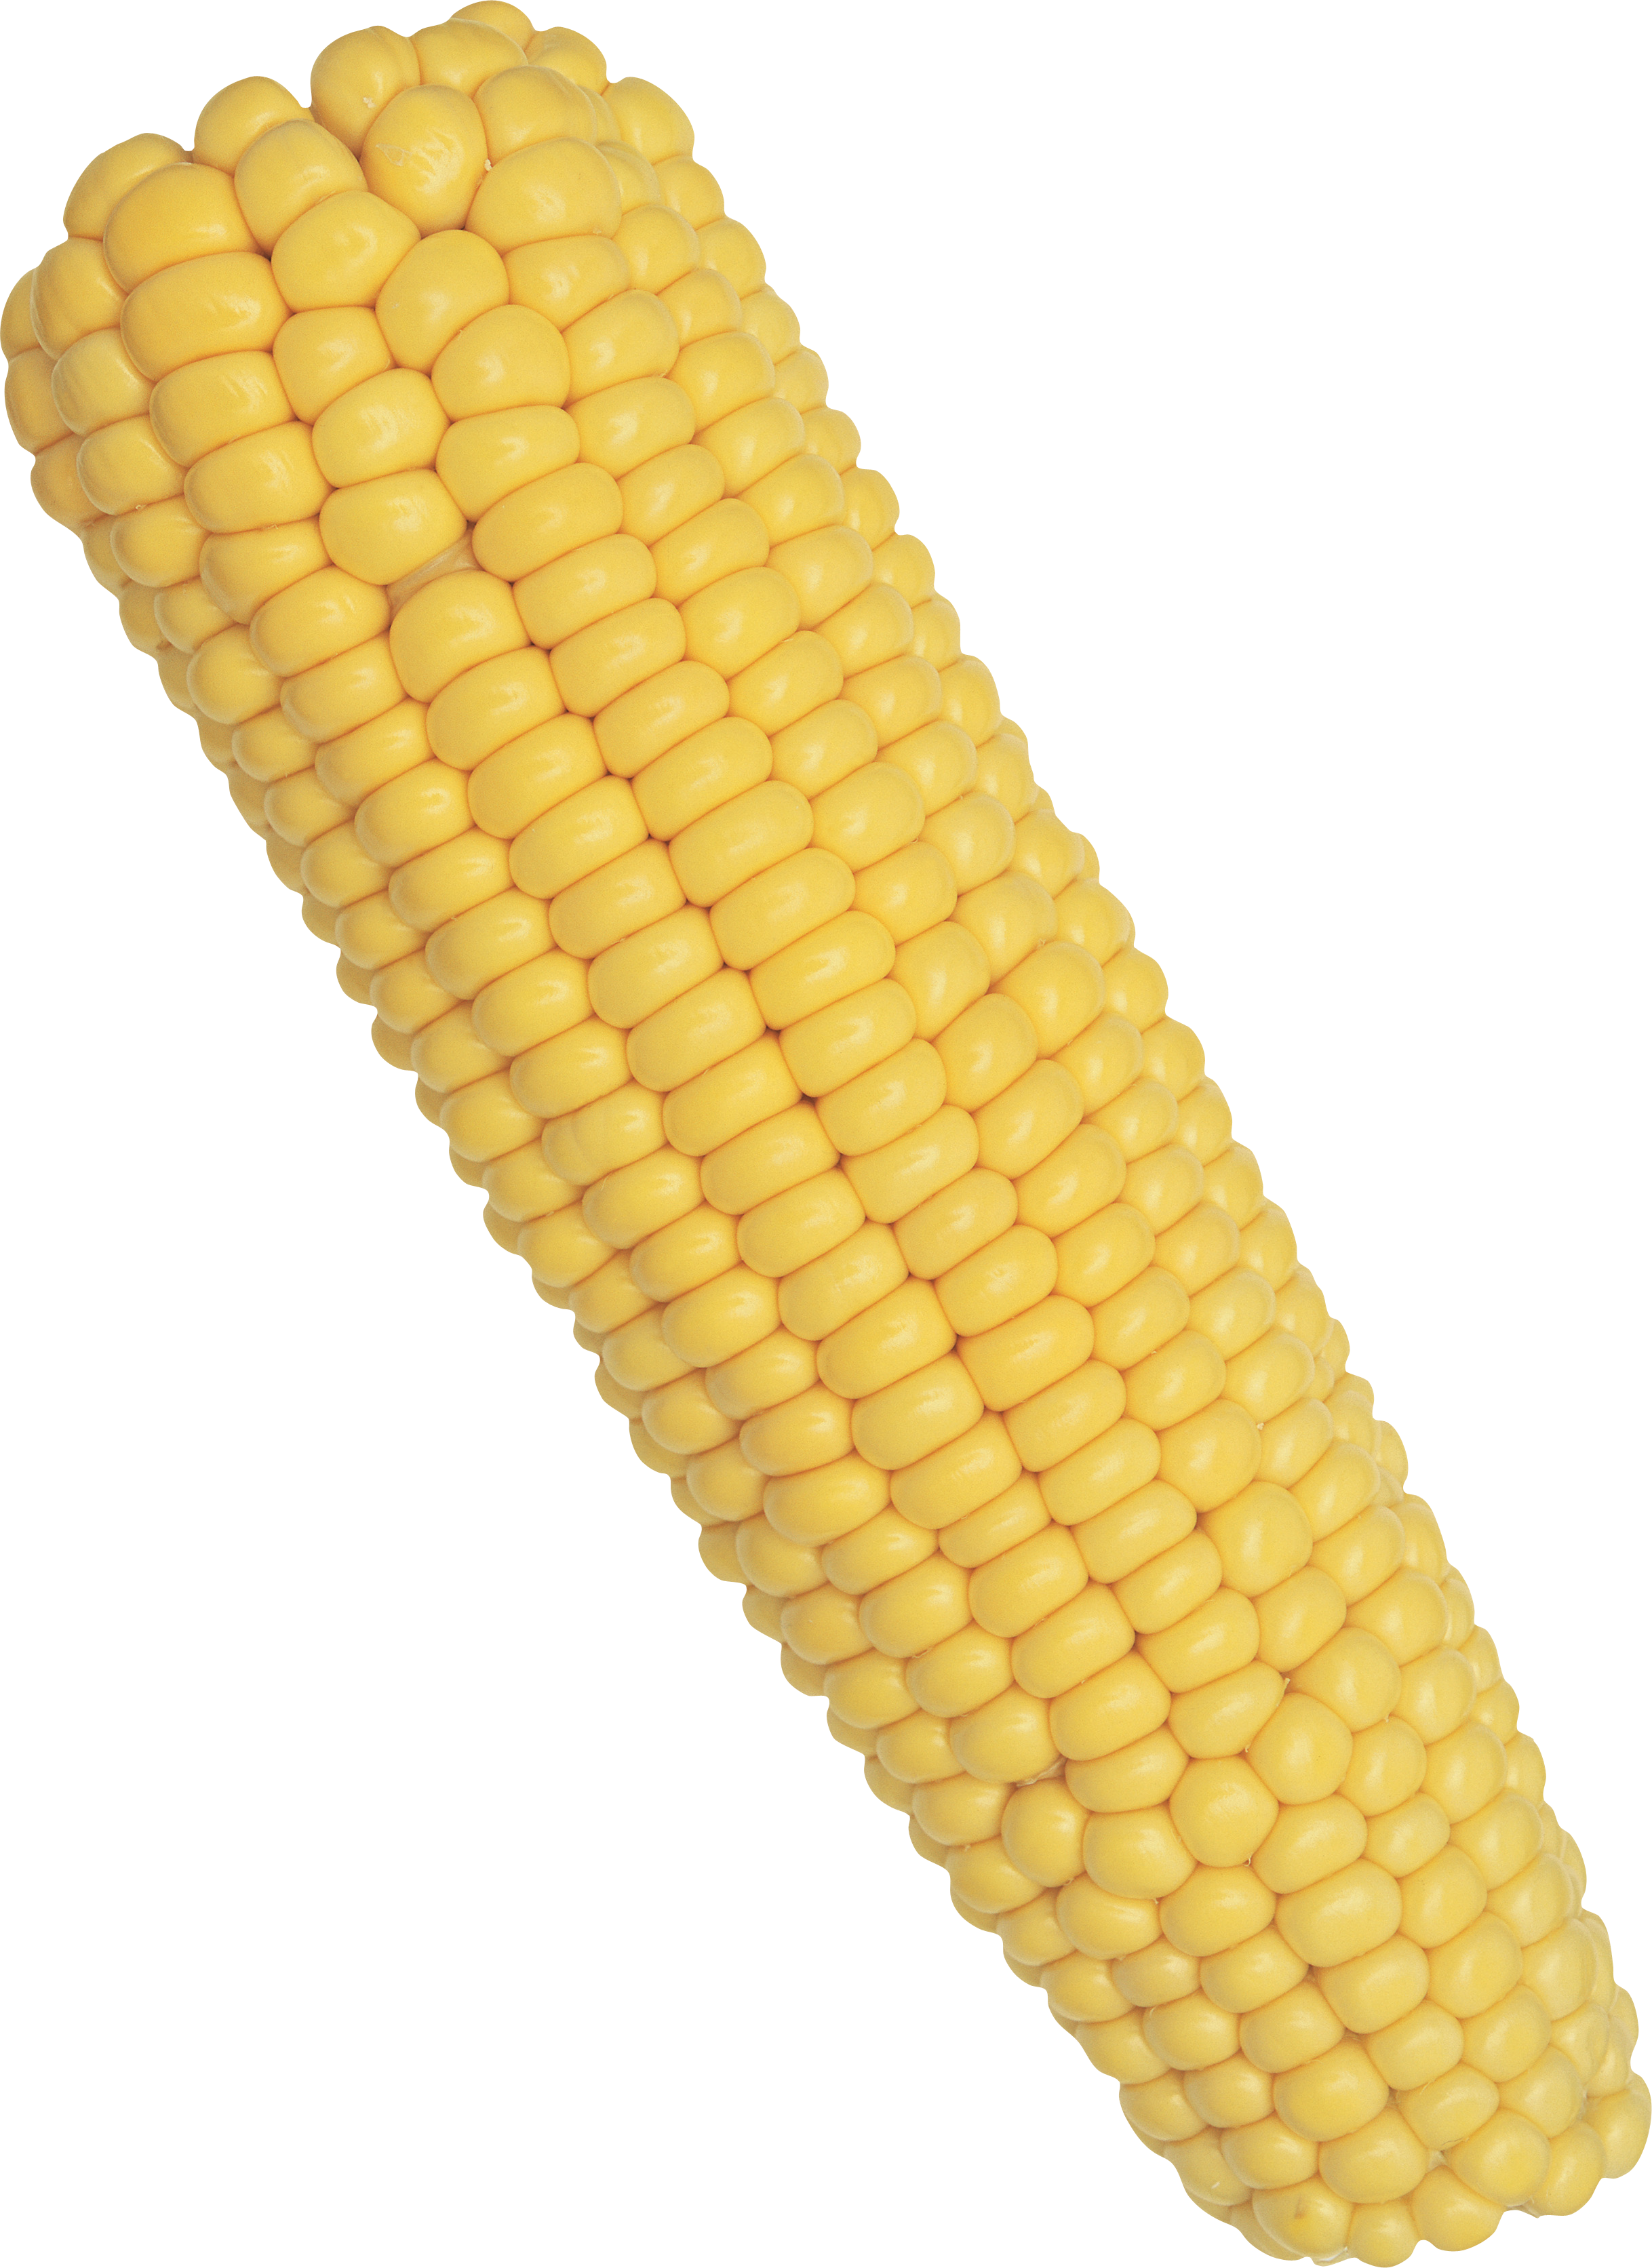 corn png images for download crazypngm crazy #21030